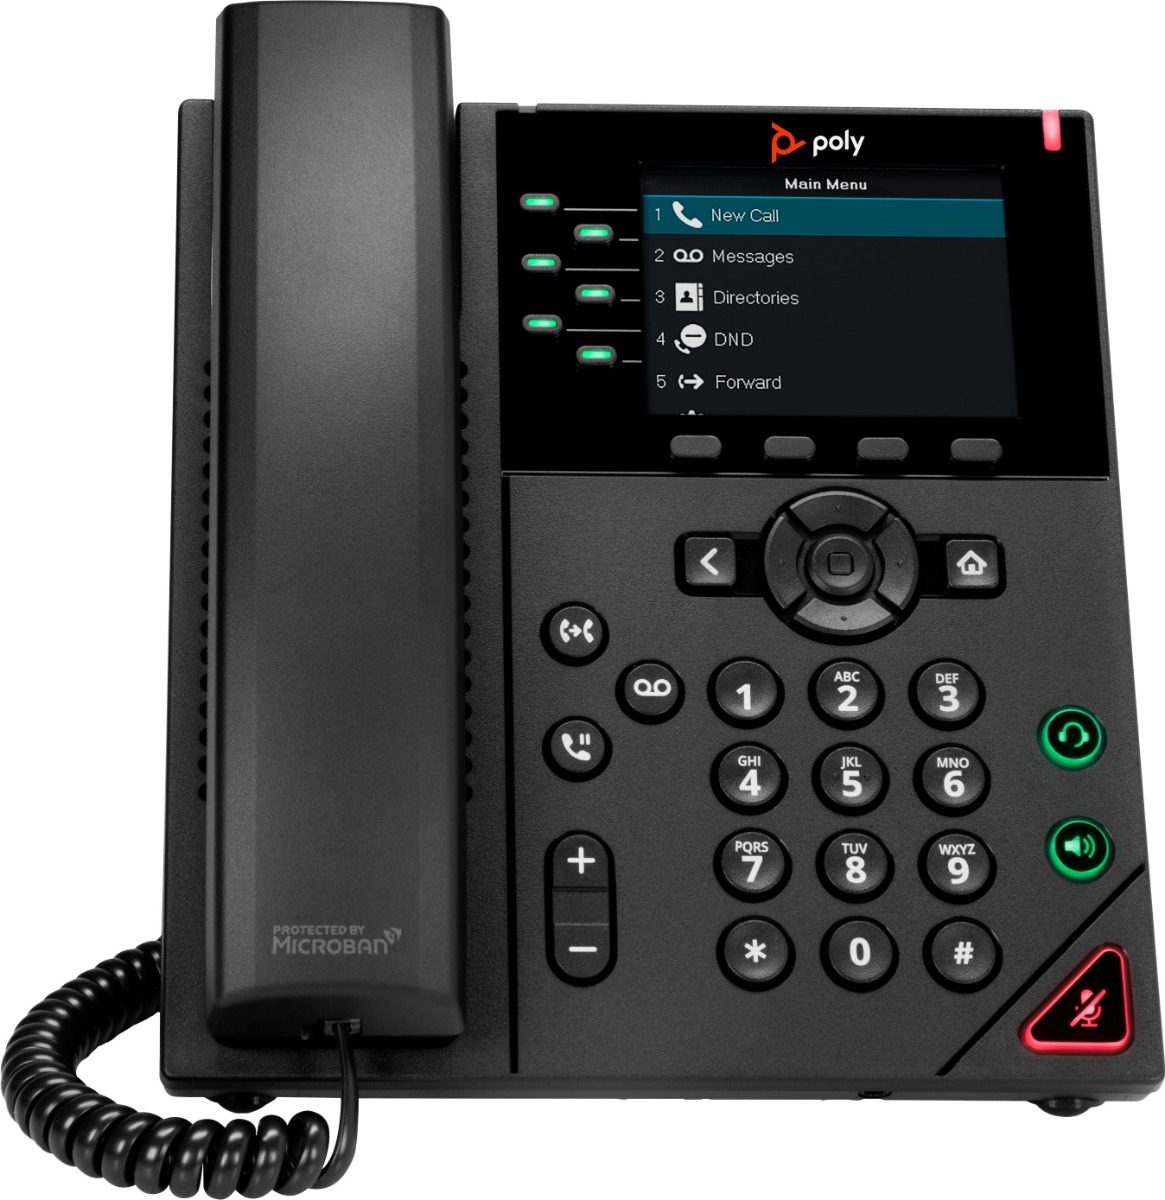 Who is the producer of the product Polycom VVX 350 6-Line Color IP Phone?